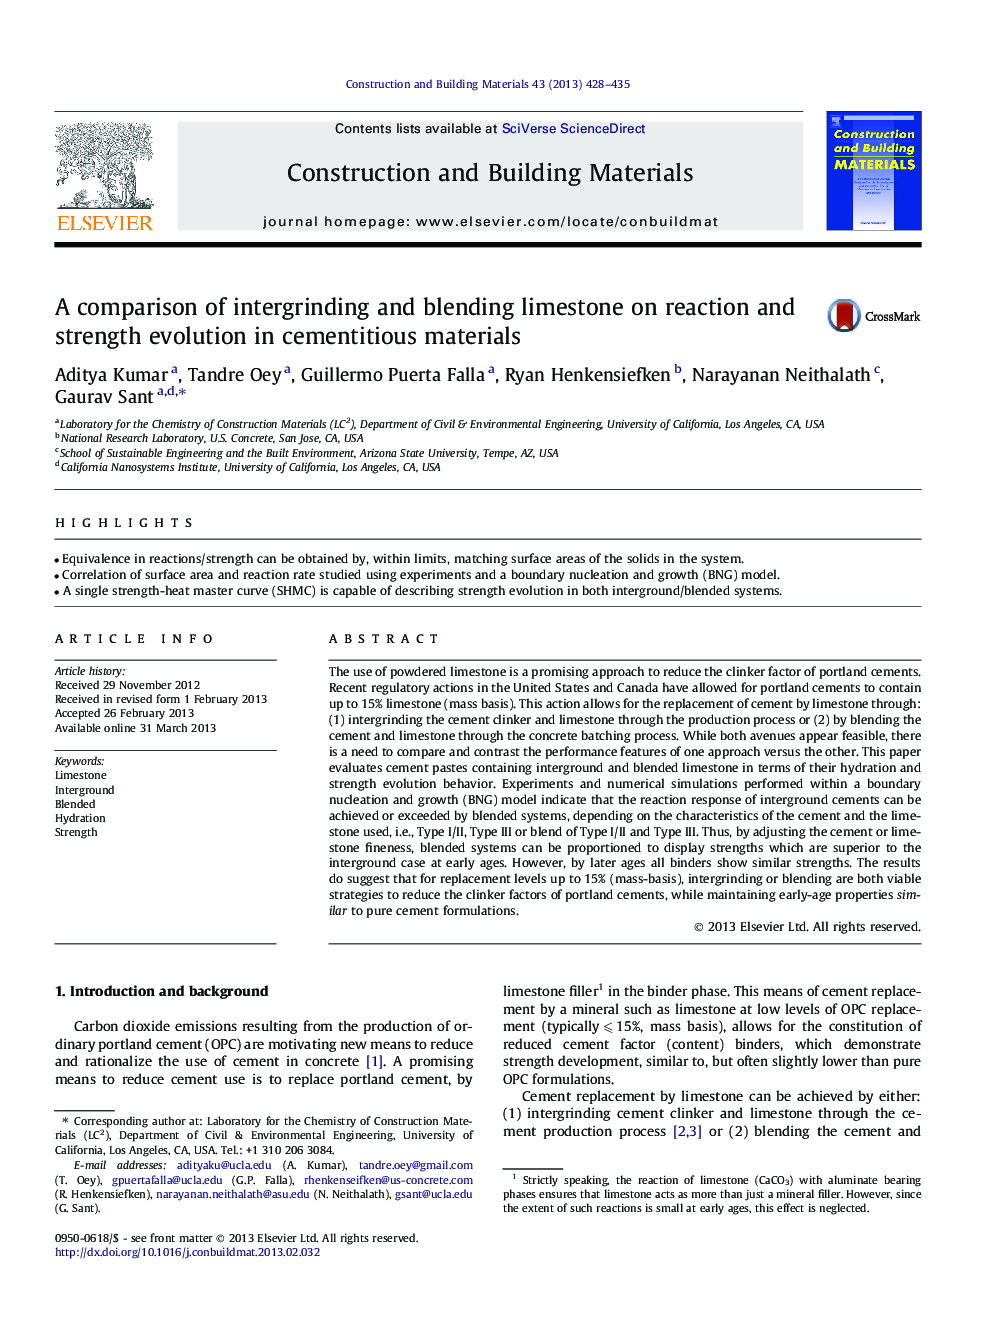 A comparison of intergrinding and blending limestone on reaction and strength evolution in cementitious materials